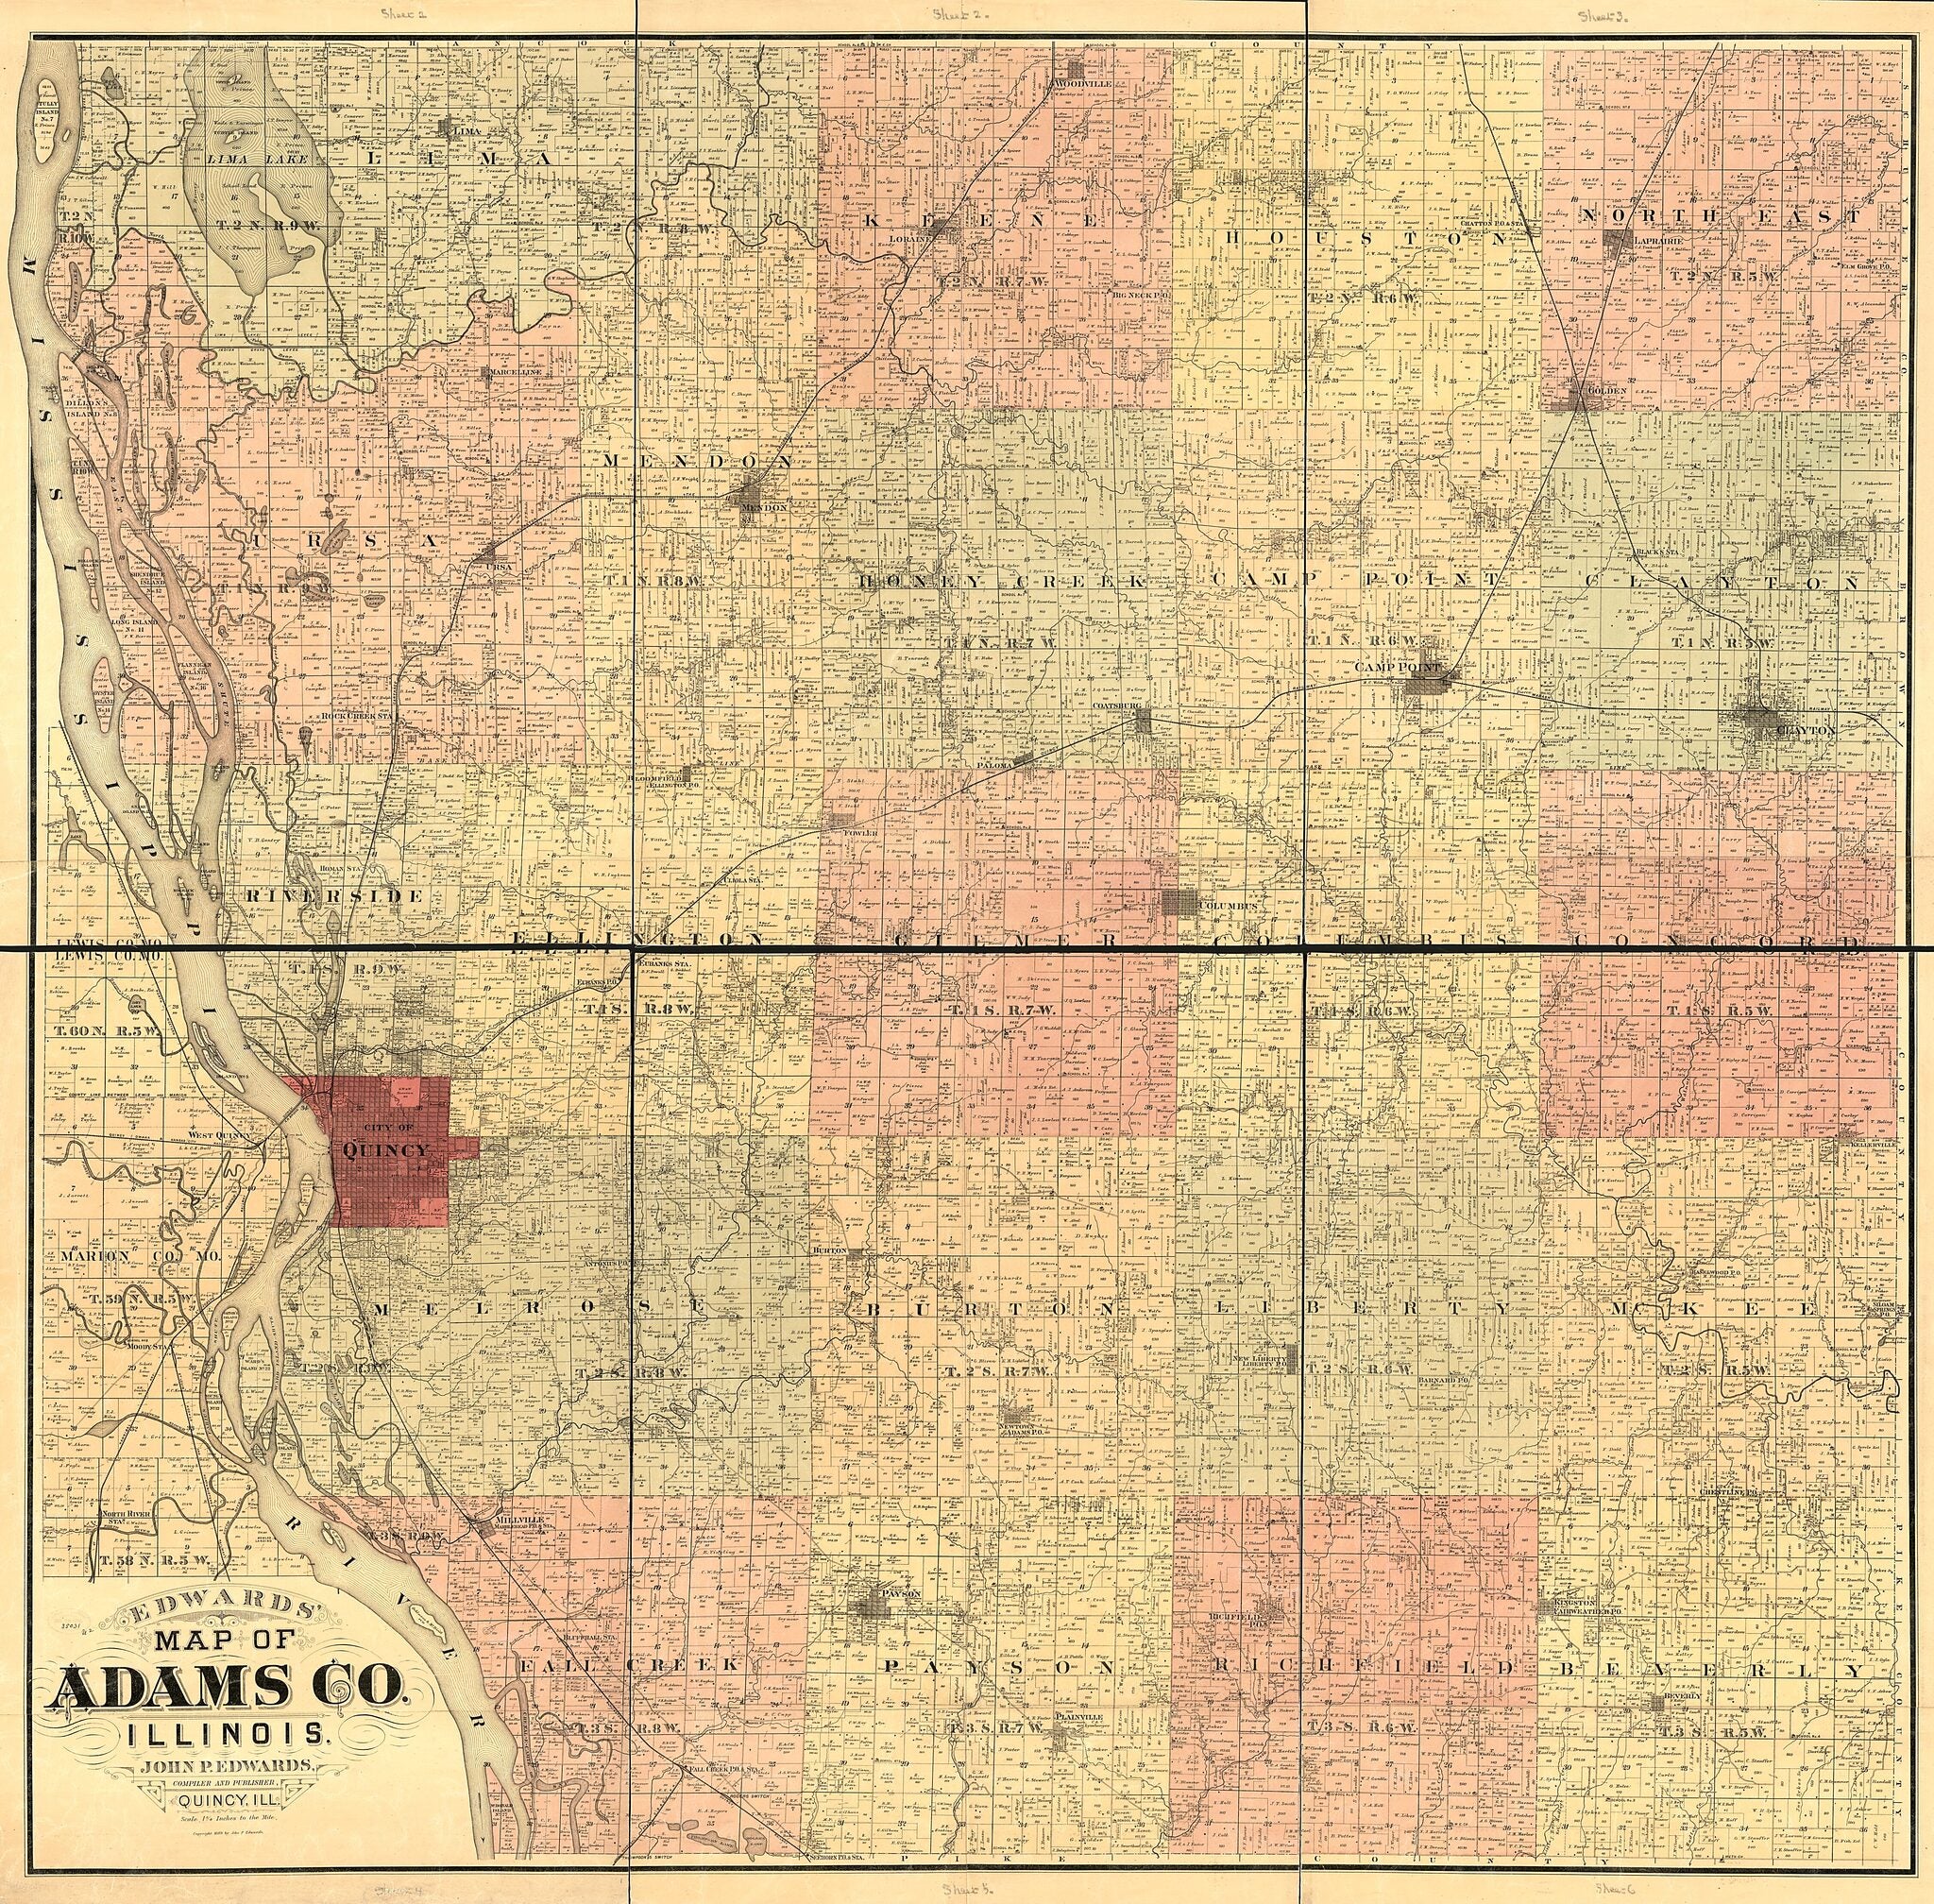 This old map of Edwards&